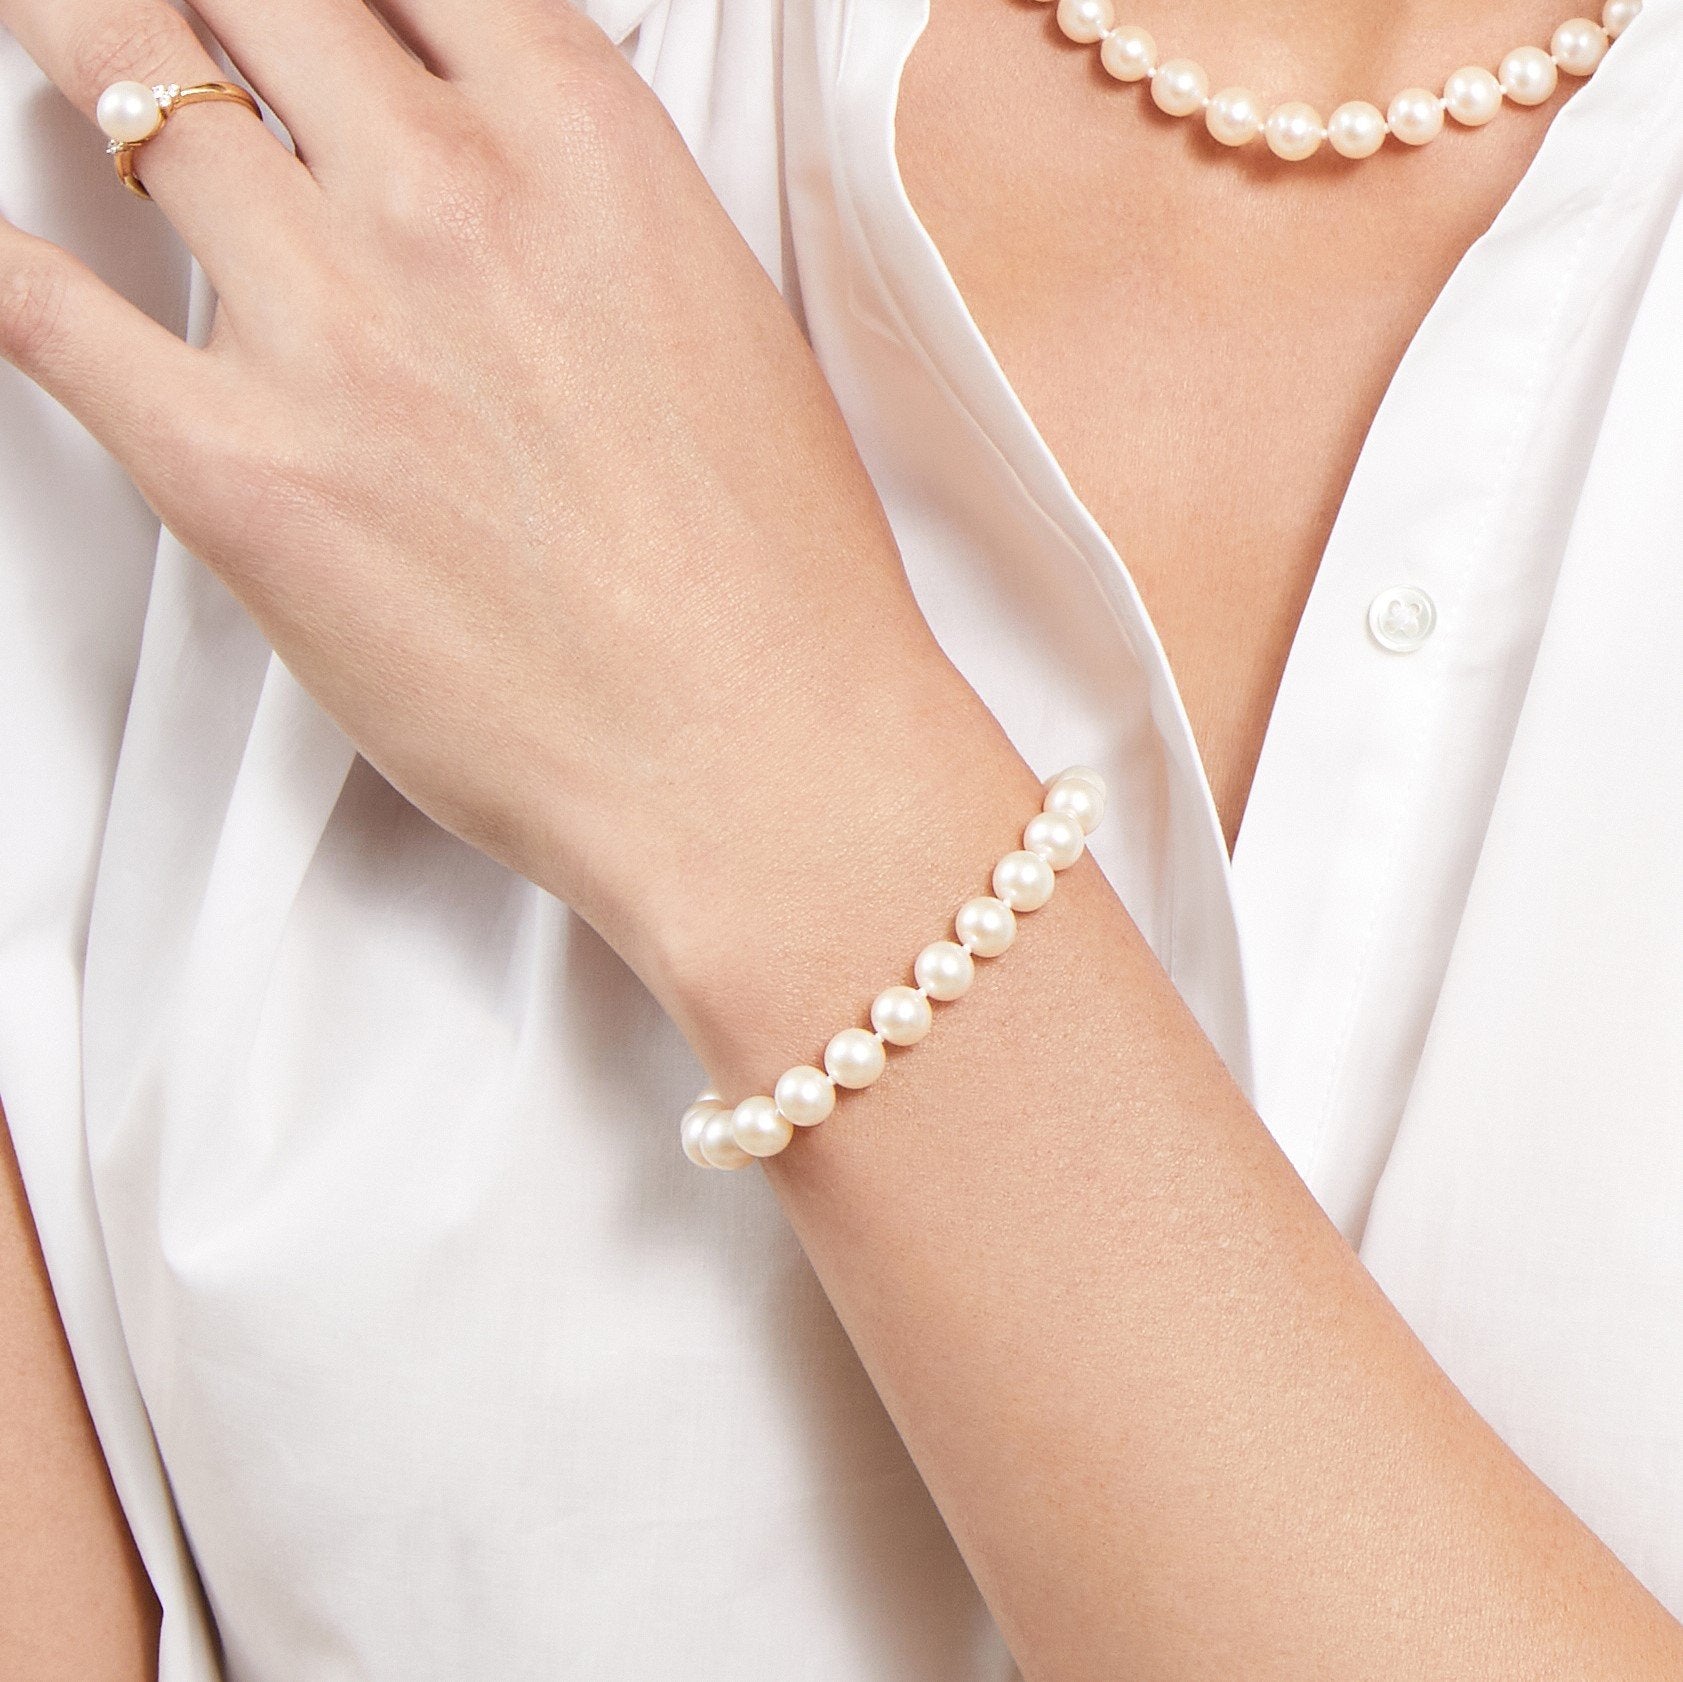 Pink pearl bracelets - Magan Pearls and Jewels (Since 1971) New - 3991718